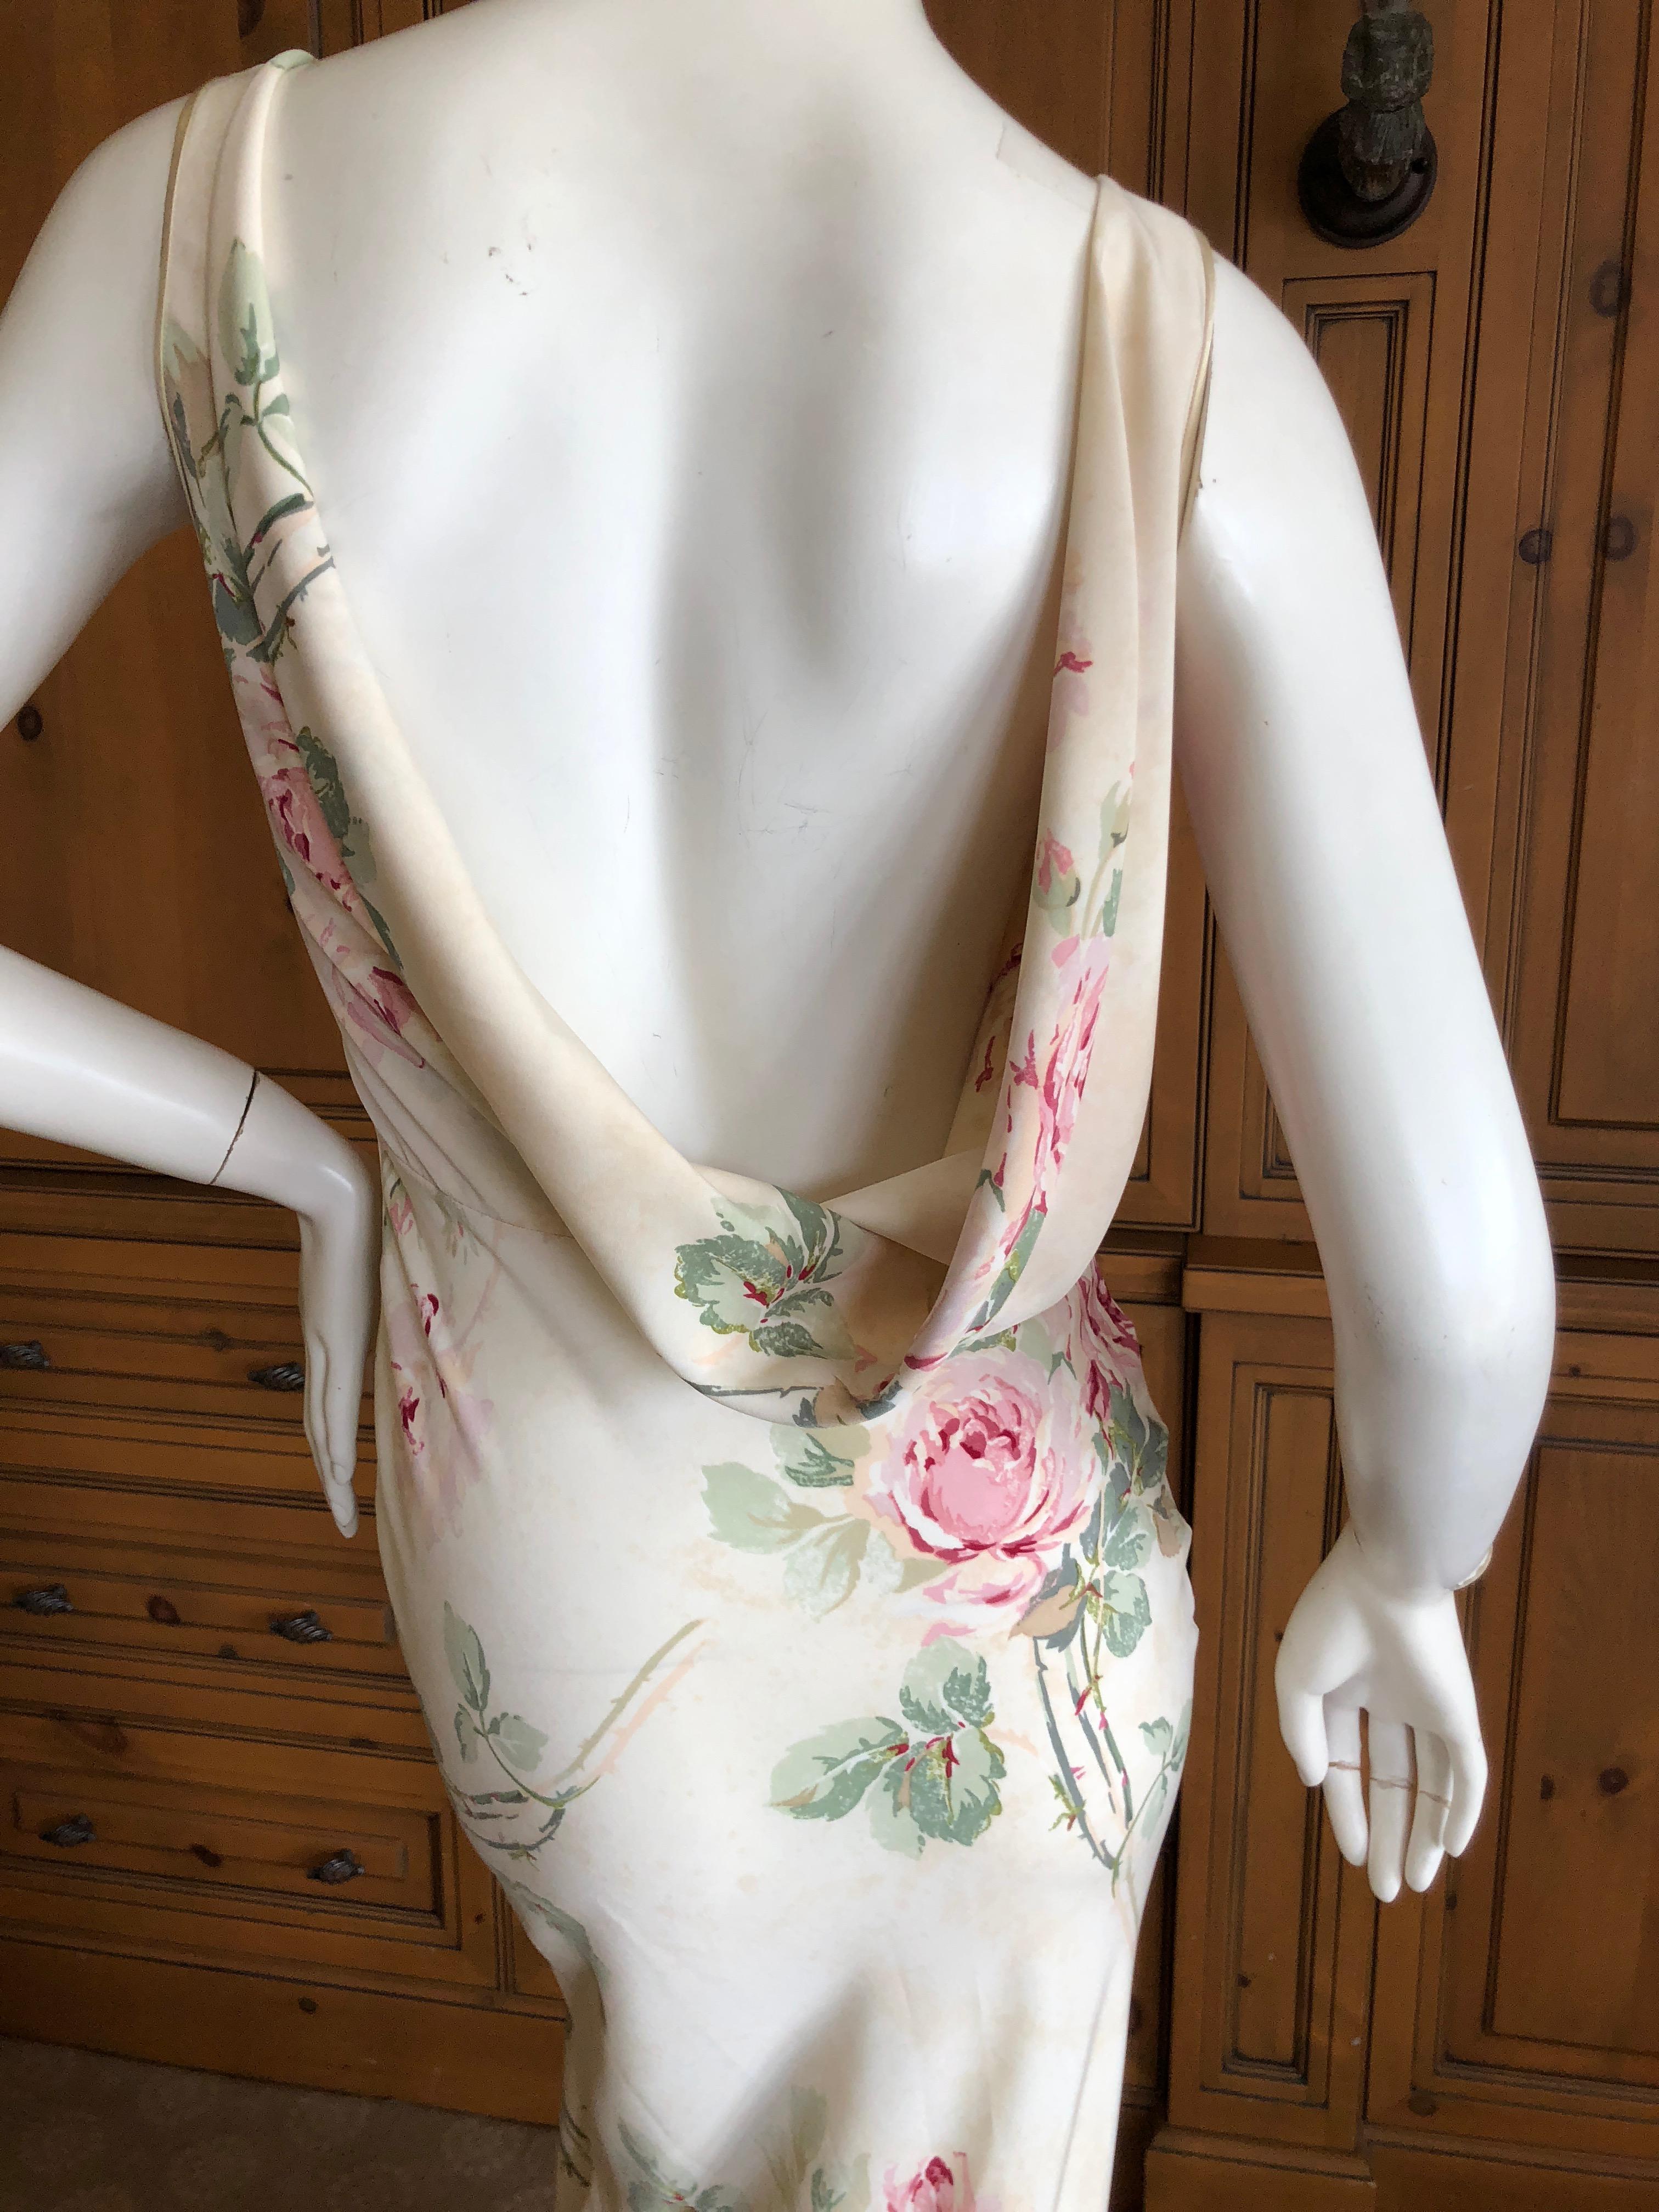 John Galliano Bias Cut Floral Dress with Draped Back and Train, 1990s  For Sale 9